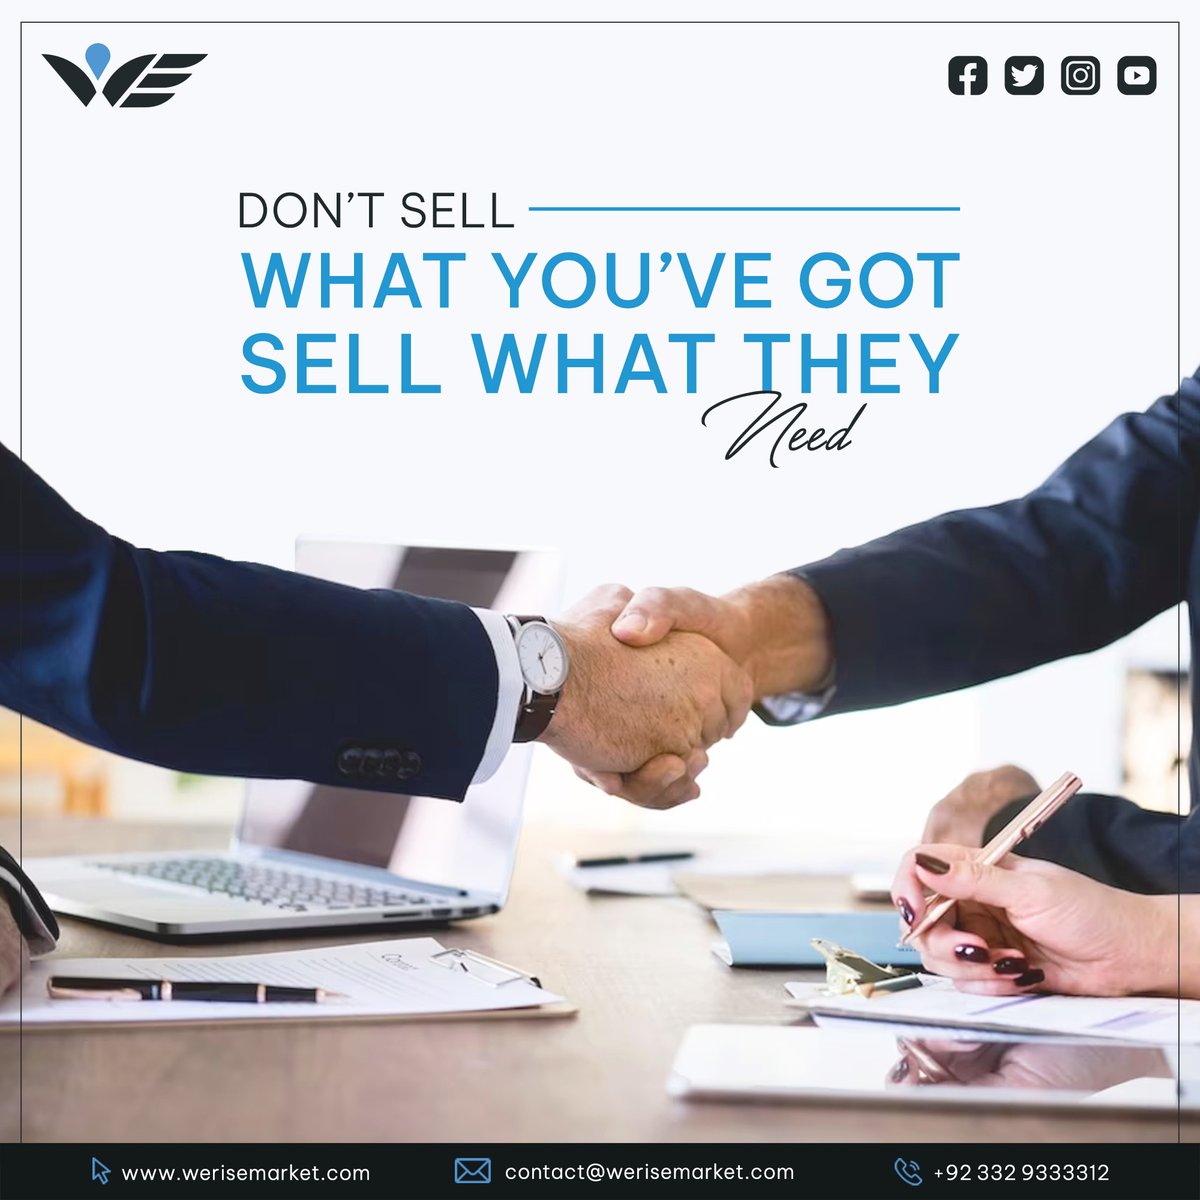 Don’t sell what you’ve got to sell, Sell what your customers need. Only this set of mind succeeds in Business. For more tips please follow our page! 𝐂𝐚𝐥𝐥+92 332 933 3312 𝐖𝐞𝐛𝐬𝐢𝐭𝐞: werisemarket.com